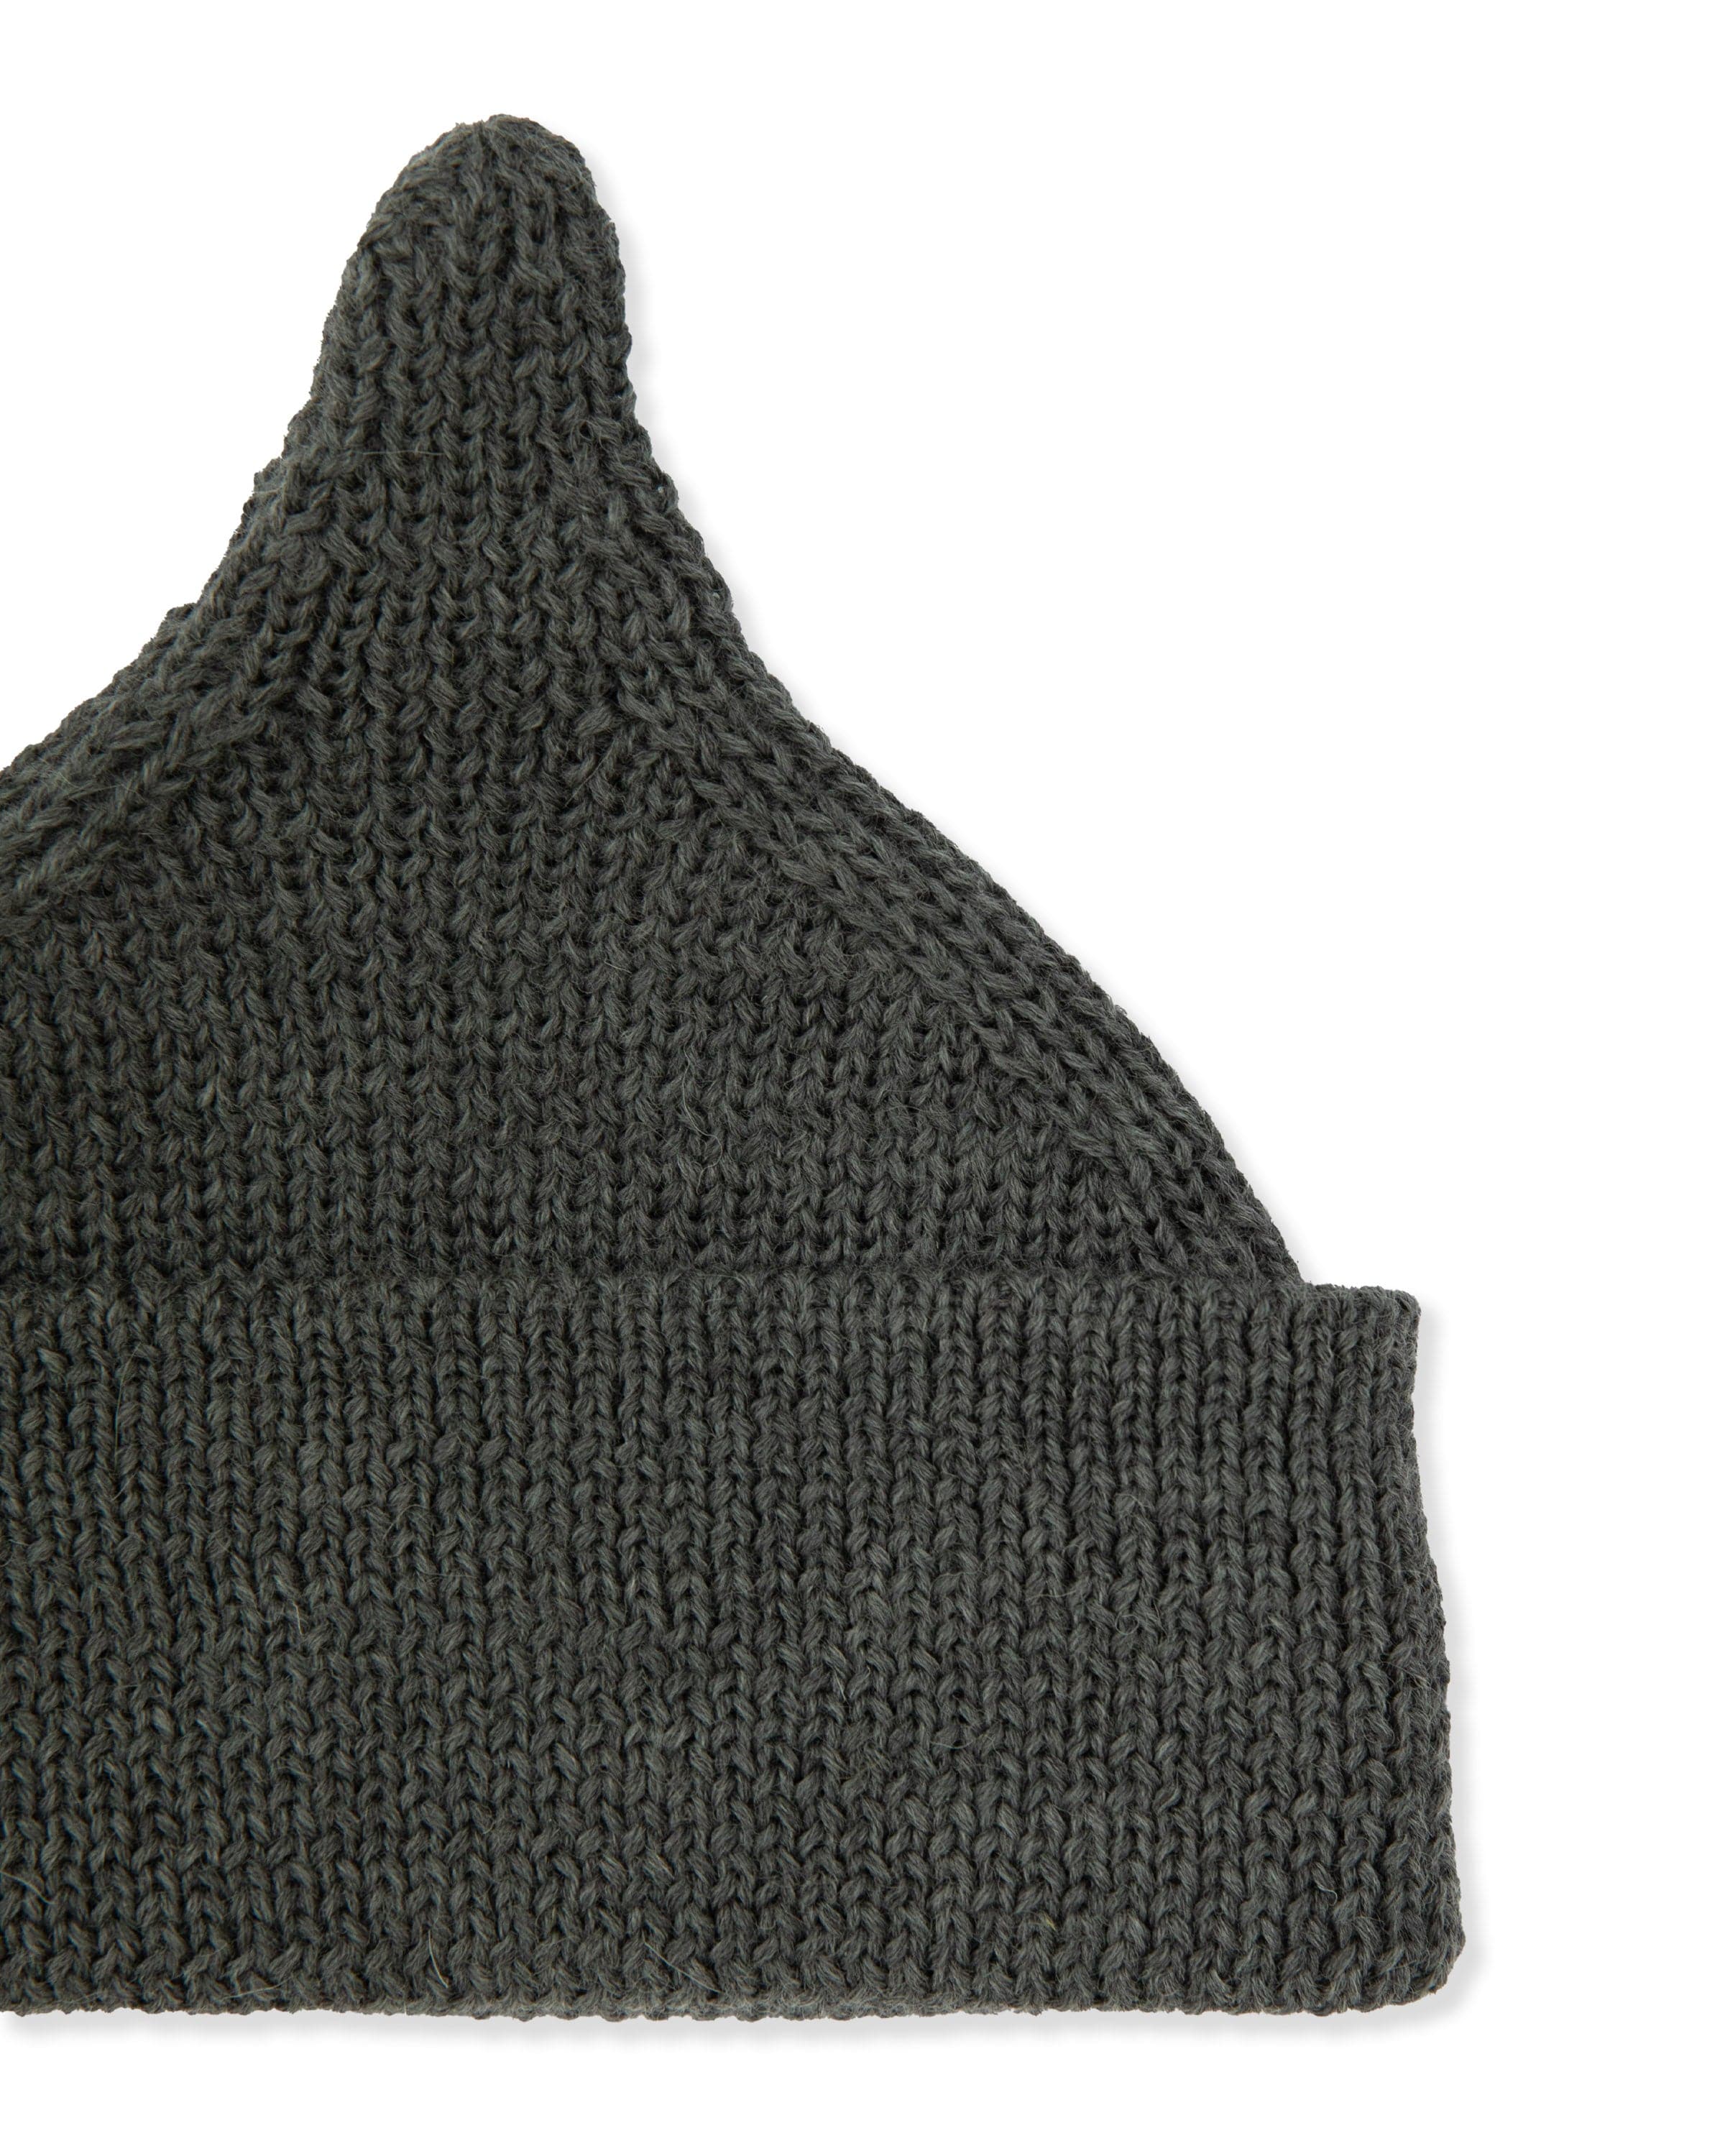 James Street Co | BABY Port Beanie - Charcoal